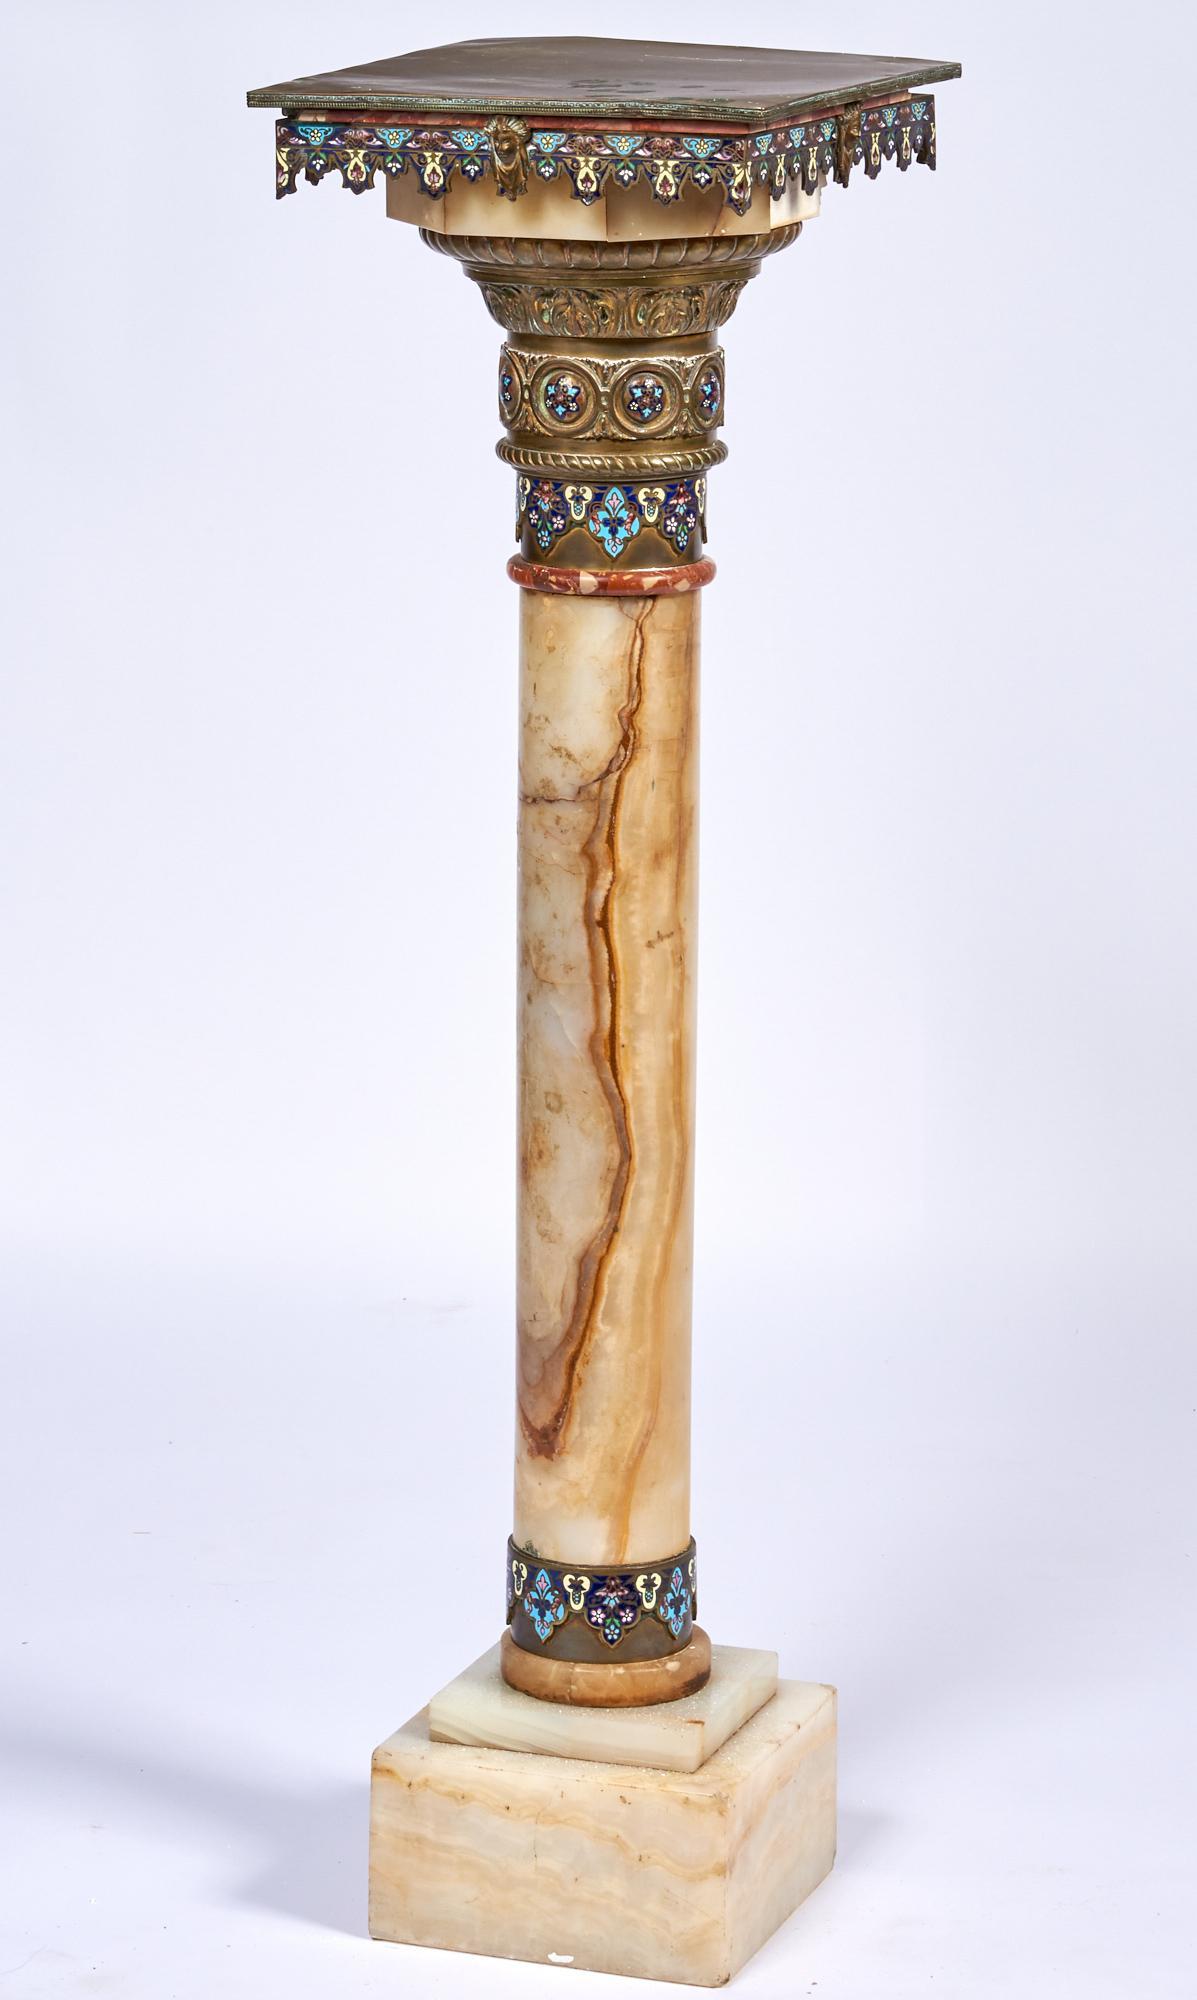 French 19th century Louis XVI style champleve enamel and onyx pedestal.